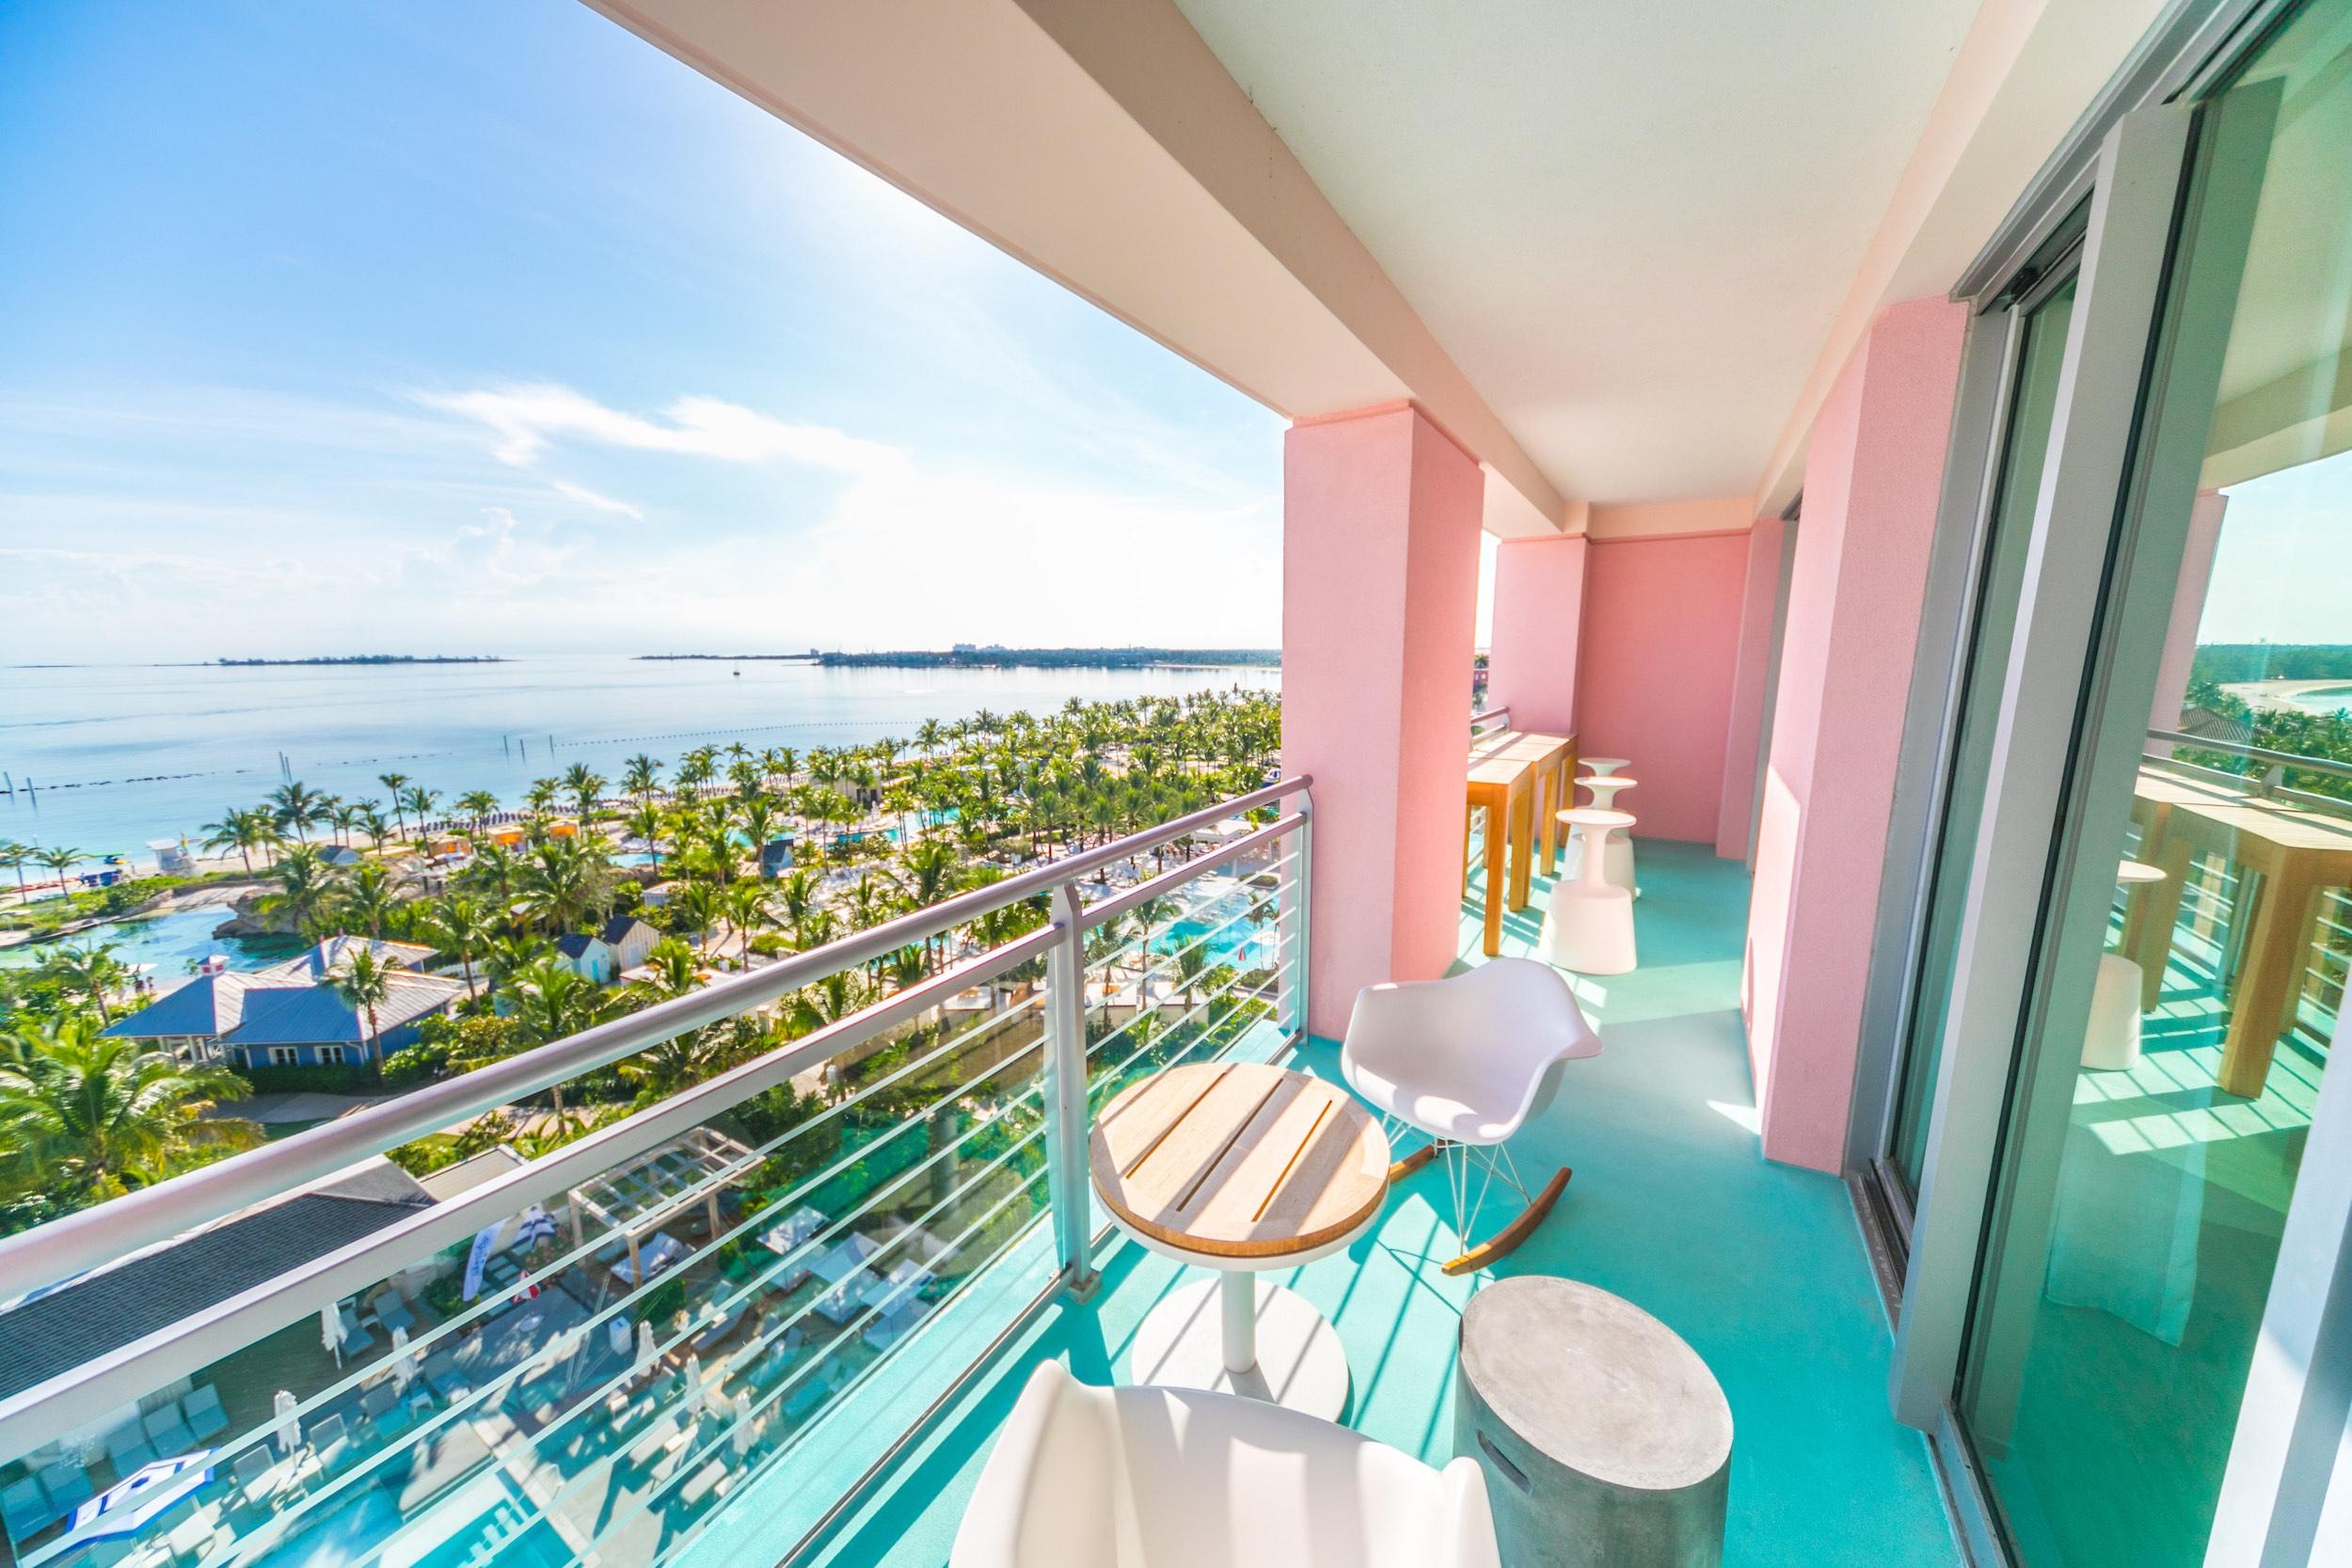 Pink and turquoise balcony overlooking tropical ocean